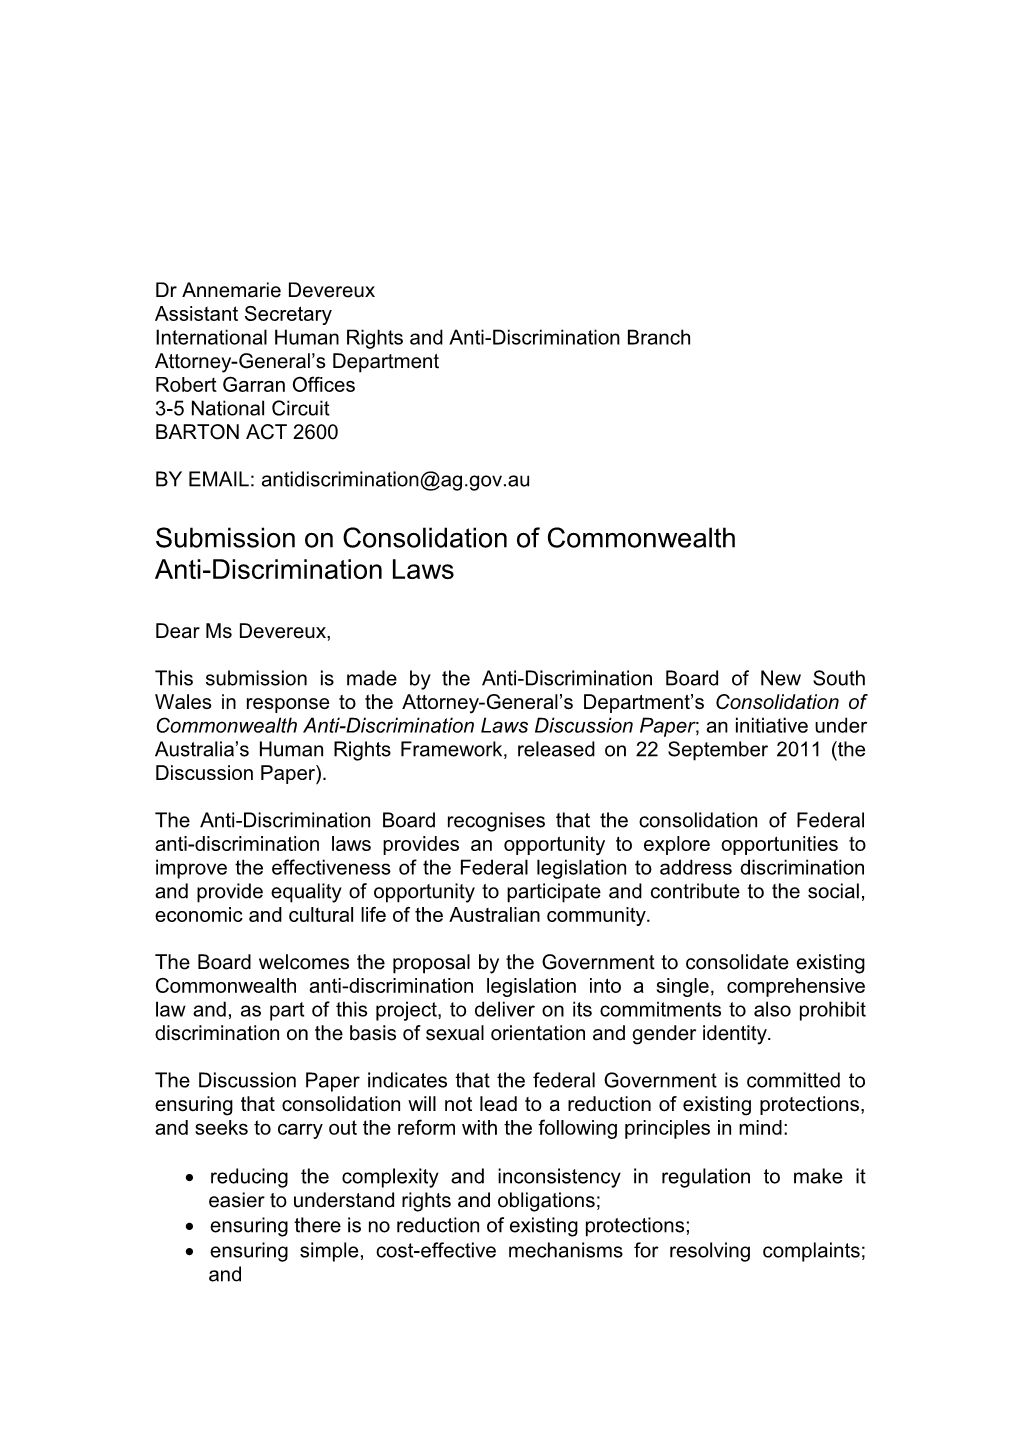 Submission on Consolidation of Commonwealth Anti-Discrimination Laws